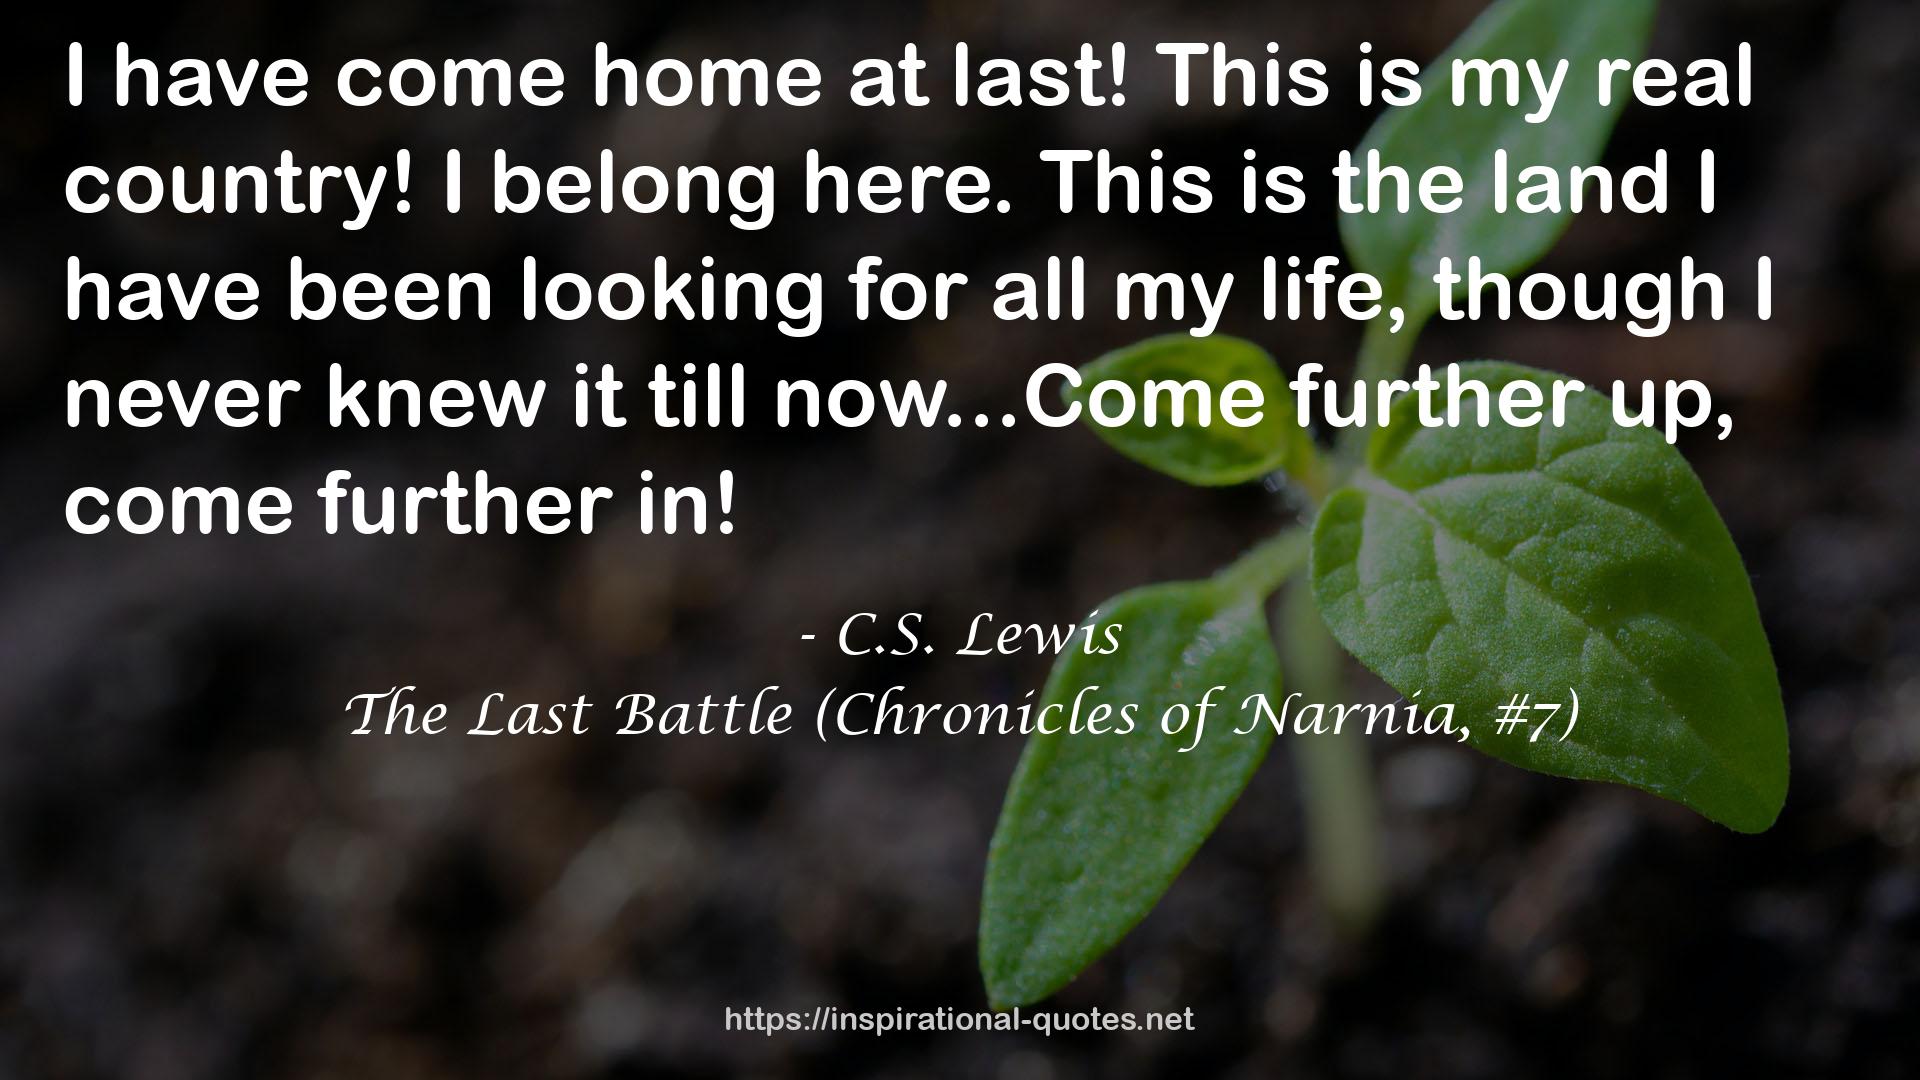 The Last Battle (Chronicles of Narnia, #7) QUOTES